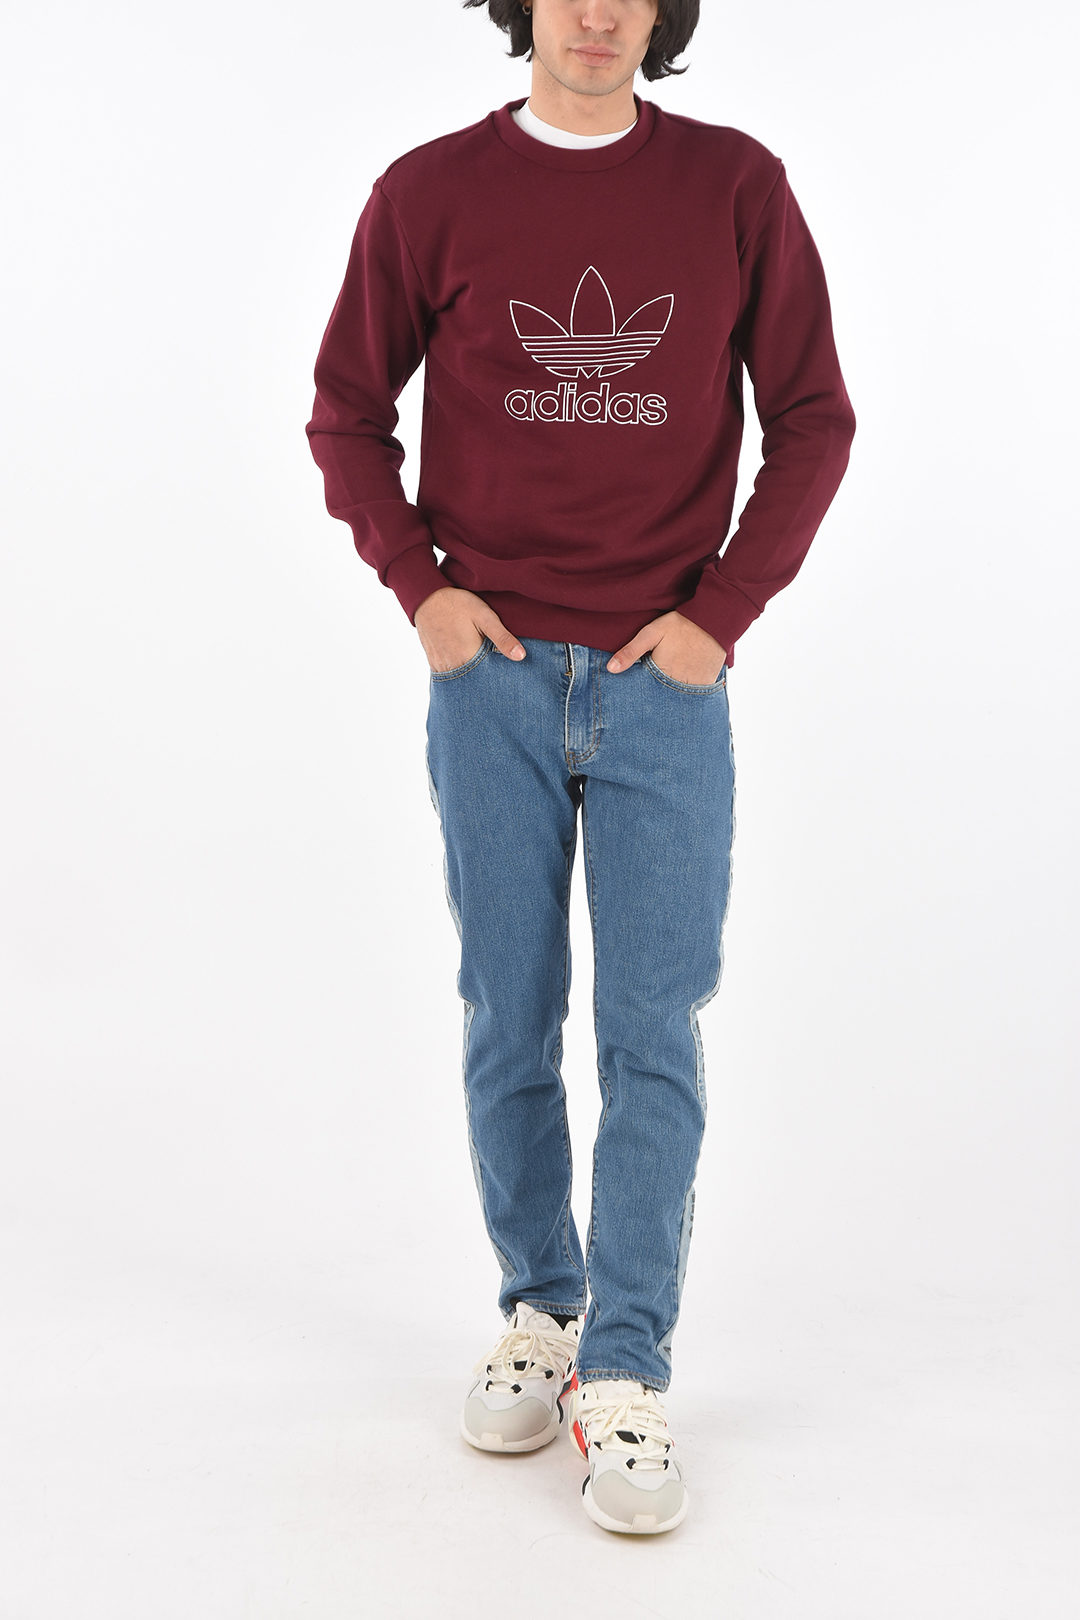 Adidas Crewneck sweater OUTLINE with embroidered logo men 